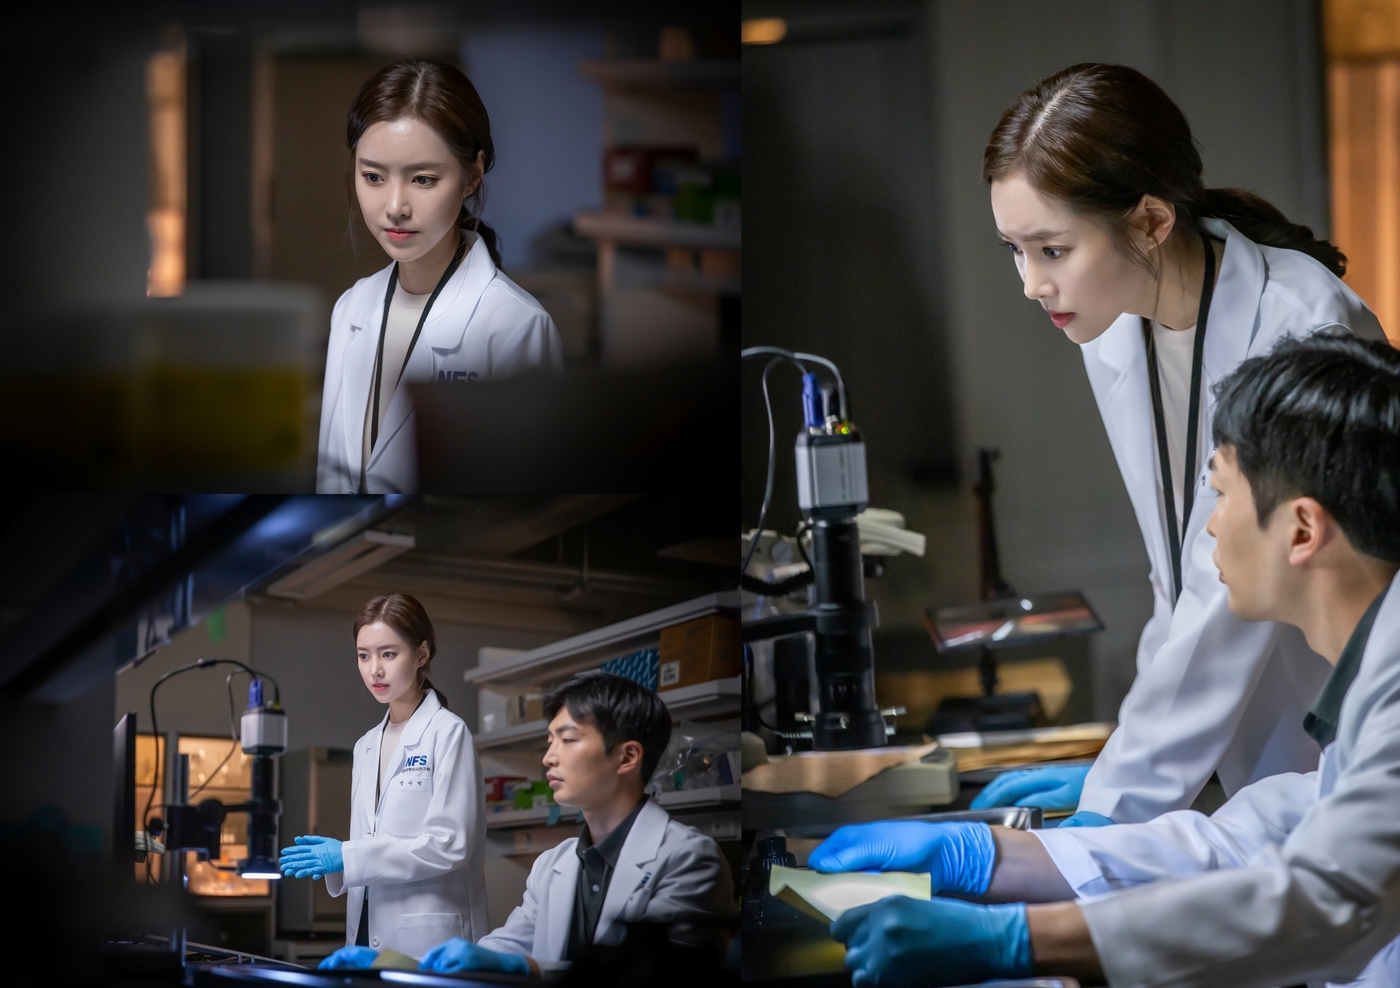 Seoul = = A still cut was released by Jin Se-yeon, who transformed into a bone autopsy specialist.KBS 2TV New Moonwha Drama Bone Again (playplayed by Jung Su-mi/directed by Jin Hyung-wook) released a still cut that captured Jin Se-yeon, who is on the 10th at the Bureau of Korea on the 8th.Bone Again will draw the fate and resurrection of three men and women who are intertwined with two lives.Jang Gi-yong (Kong Ji-cheol/Cheon Jong-beom station), Jin Se-yeon (Jung Ha-eun/Intimacybin station), and Lee Soo-hyuk (Cha Hyung-bin/Kim Soo-hyuk station) will play two roles in the background of the 1980s and two current eras.The still cut released on the day included the image of Intimacybin (Jin Se-yeon) in the present day.Intimacybin works as a bone archaeology instructor at the university and also serves as a bone autopsy for the Bureau of (Susa Institute of National Science).If Jin Se-yeons analogue purity was revealed in the character of Jung Ha Eun, who runs the old bookstore Old Future in the 80s, Intimacy Bin reveals a more powerful charisma and reveals a more different charm.Especially in the Bureau of Inspection Room, the head is tied up and the eyes are focused on the monitor.The unexpected result of frowning and approaching the desk is curious.Intimacybin, who lived in the remains excavation site during college and earned the nickname ashes sexist, is a person who has the character of releasing his or her own character only if he restores the story and secrets of unnamed remains.It is expected that what she will reveal in the picture and what role she will play in the blood-colored event that penetrates the past and present in the play.Jin Se-yeon also visited the National Institute of Science Susa for the immersion of the cast.Thanks to the careful effort not to miss the small part, it seems that better scenes come out. Meanwhile, Bone Again will be broadcasted at 10 pm on the 20th.